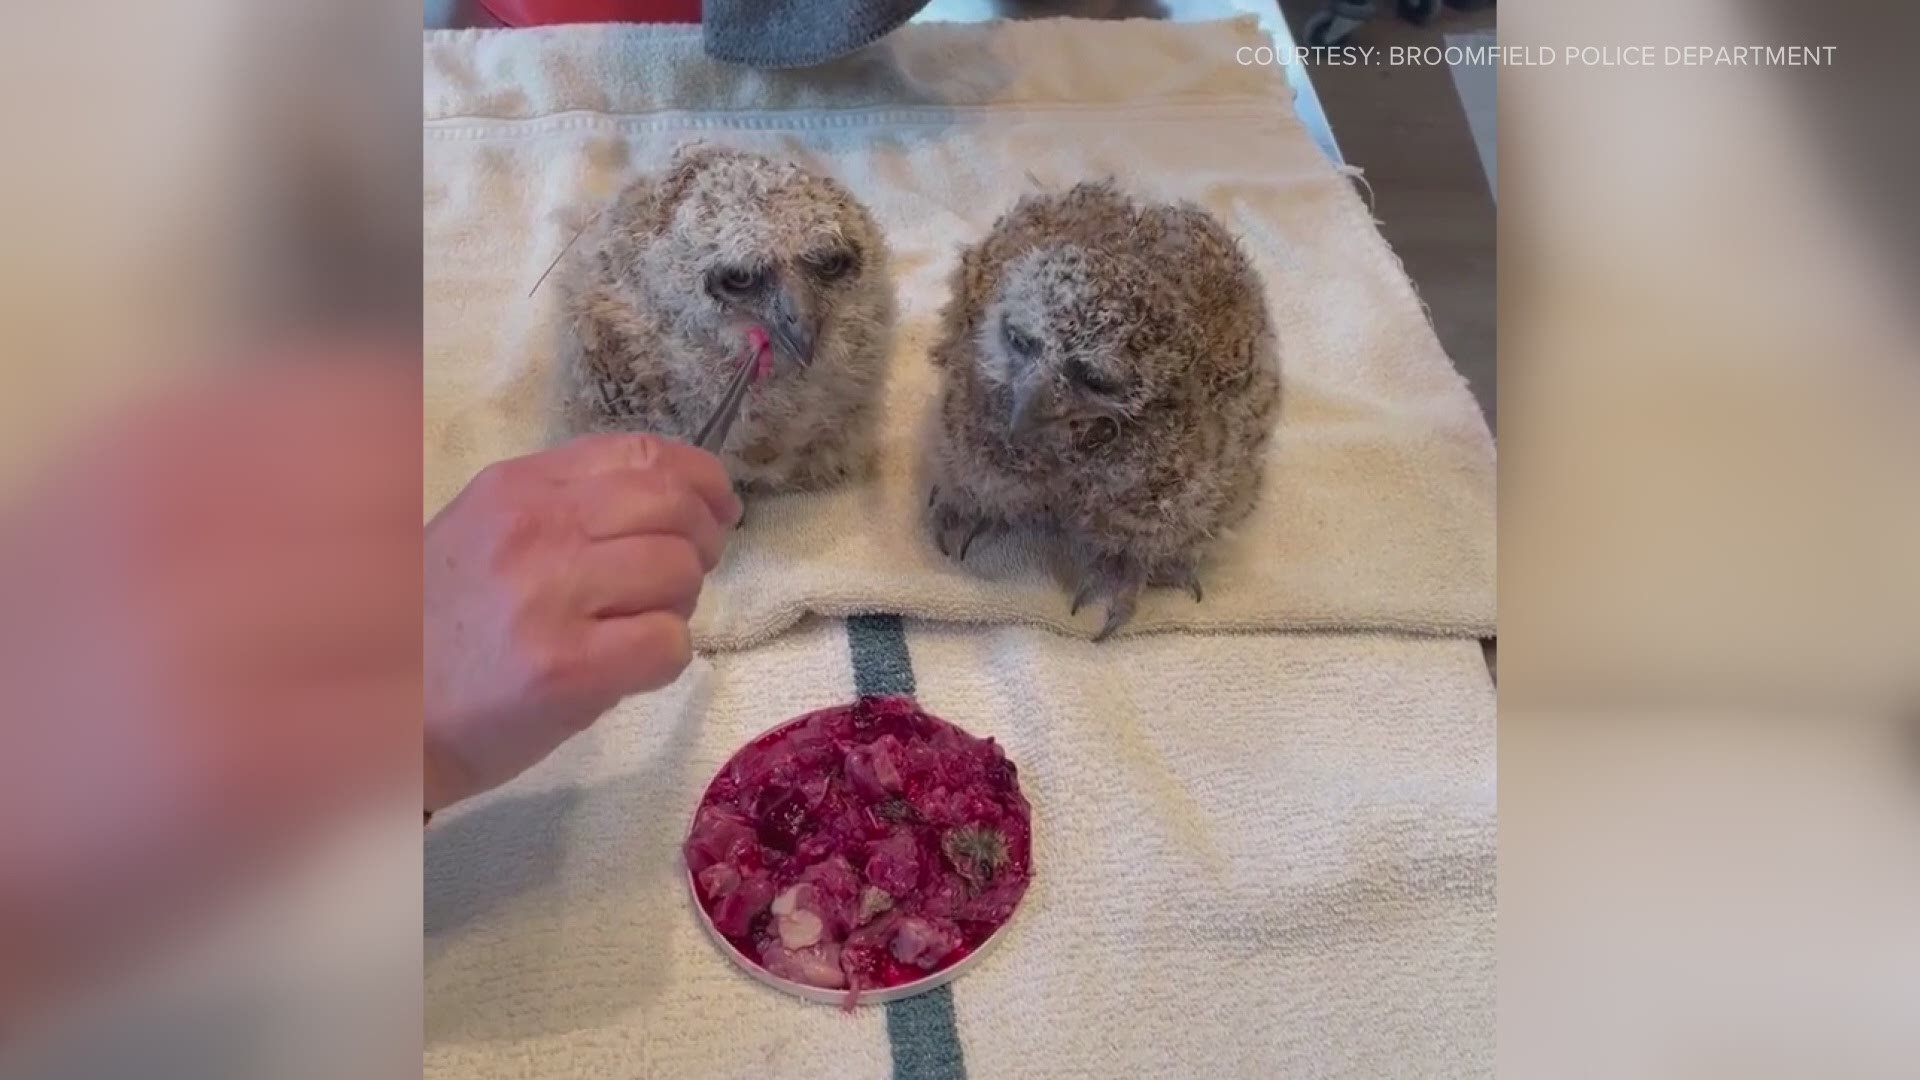 Broomfield Police shared video of two owlets who were rescued from a nest and given a fresh meal before being reunited with their mom at Birds of Prey.